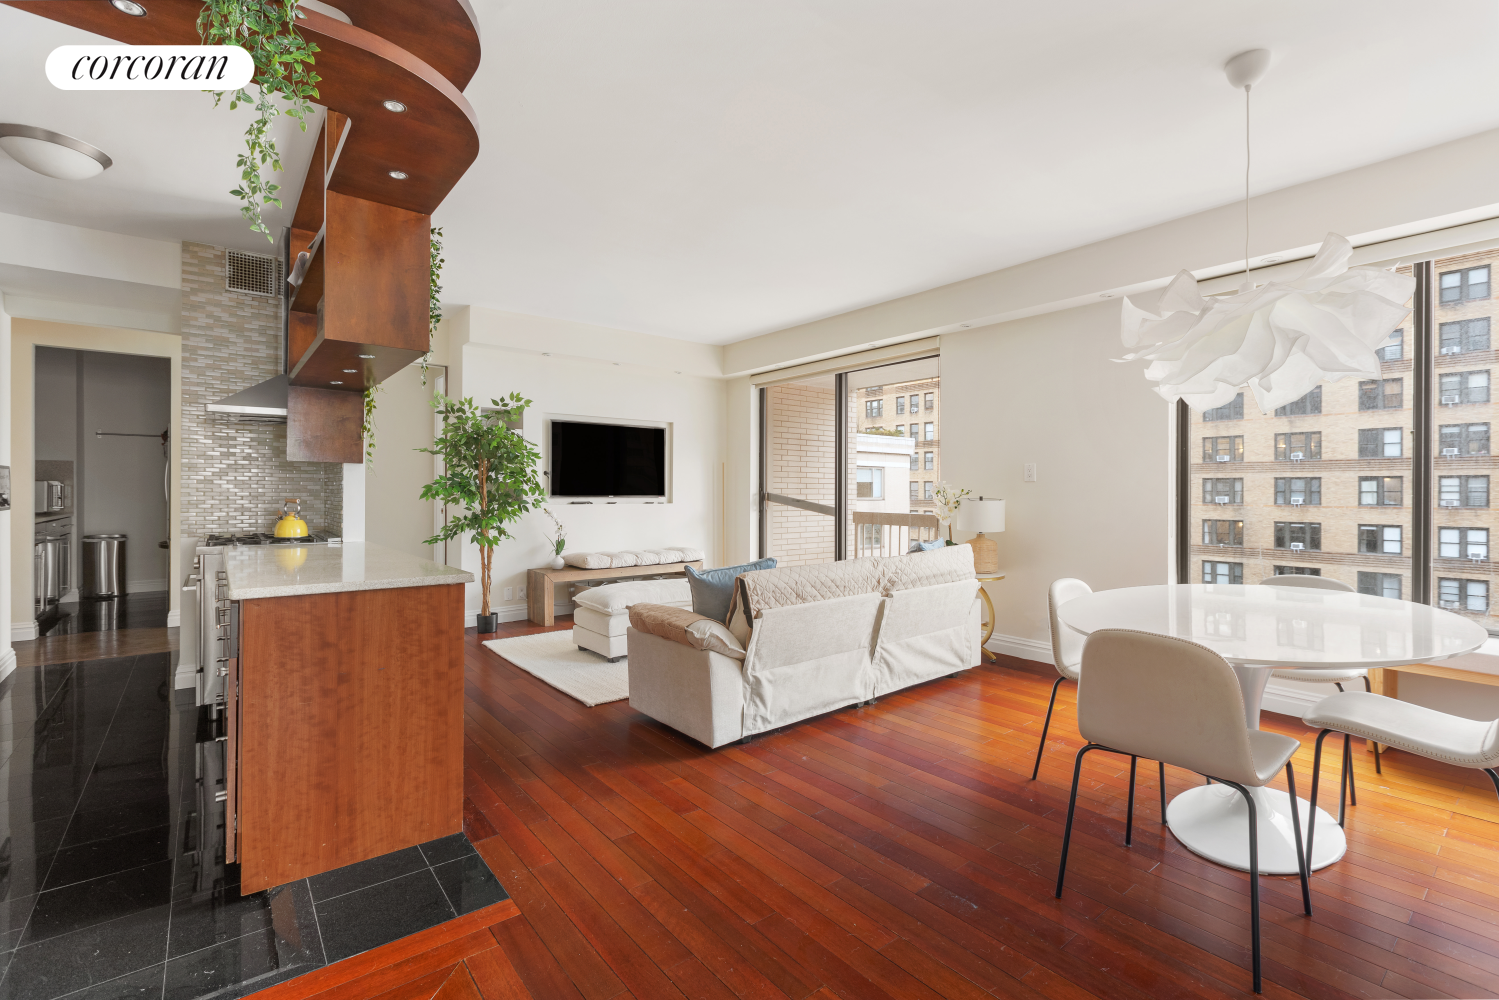 200 East 69th Street 6L, Lenox Hill, Upper East Side, NYC - 3 Bedrooms  
2.5 Bathrooms  
5 Rooms - 